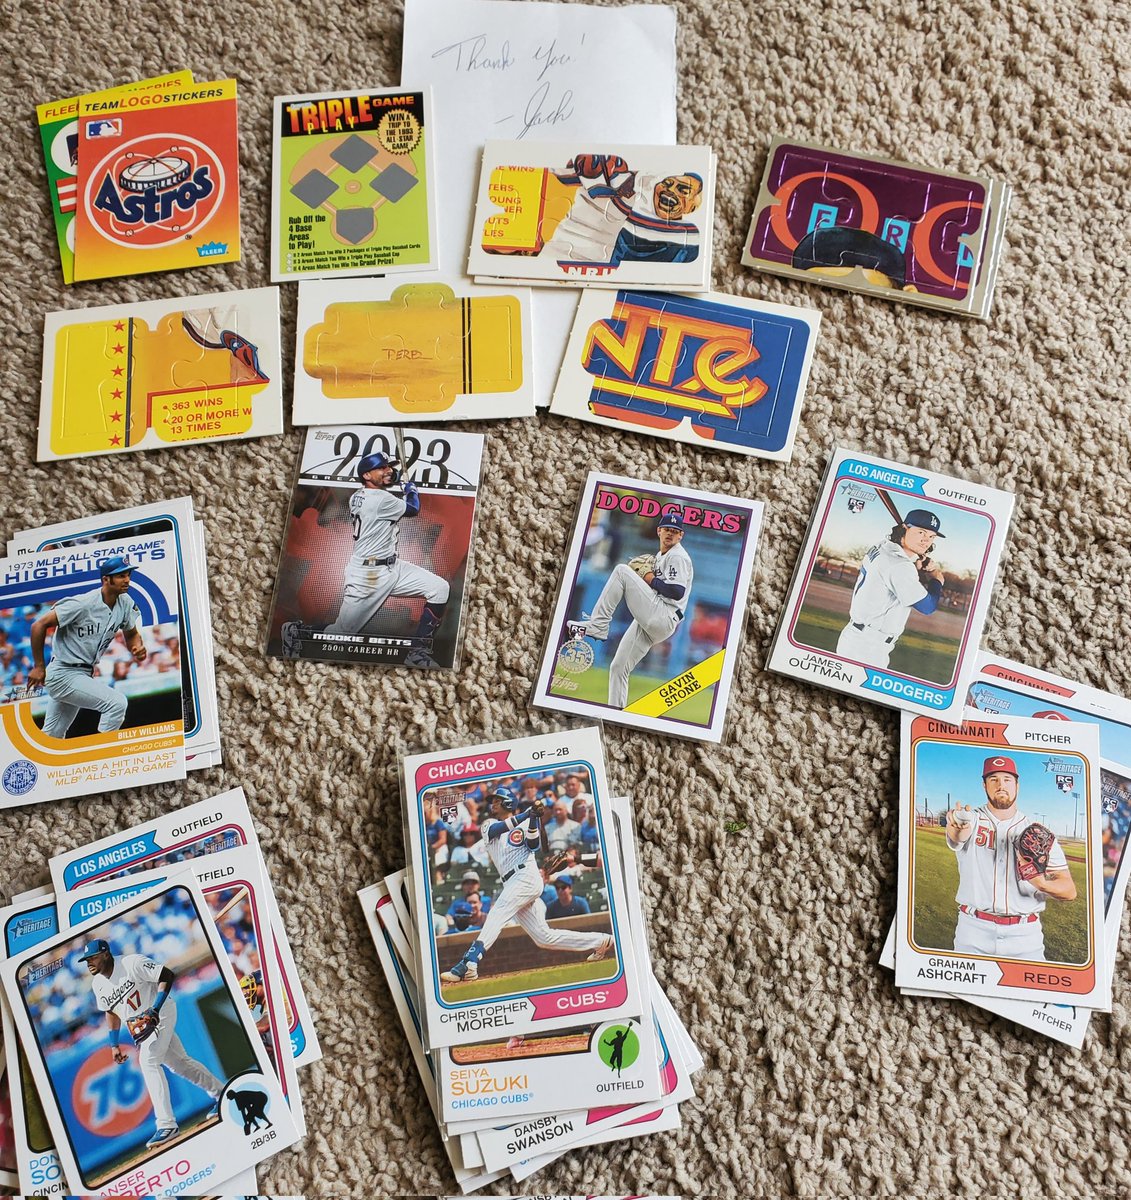 Nothing like a mail day at sons 🏠 from @PastPresentBall , right before I head home to my 🏠 . That's the good stuff. Cardboard @sam_bishop57 @russputin23 @00WabiSabi00 @dodgers_cards @CardPurchaser